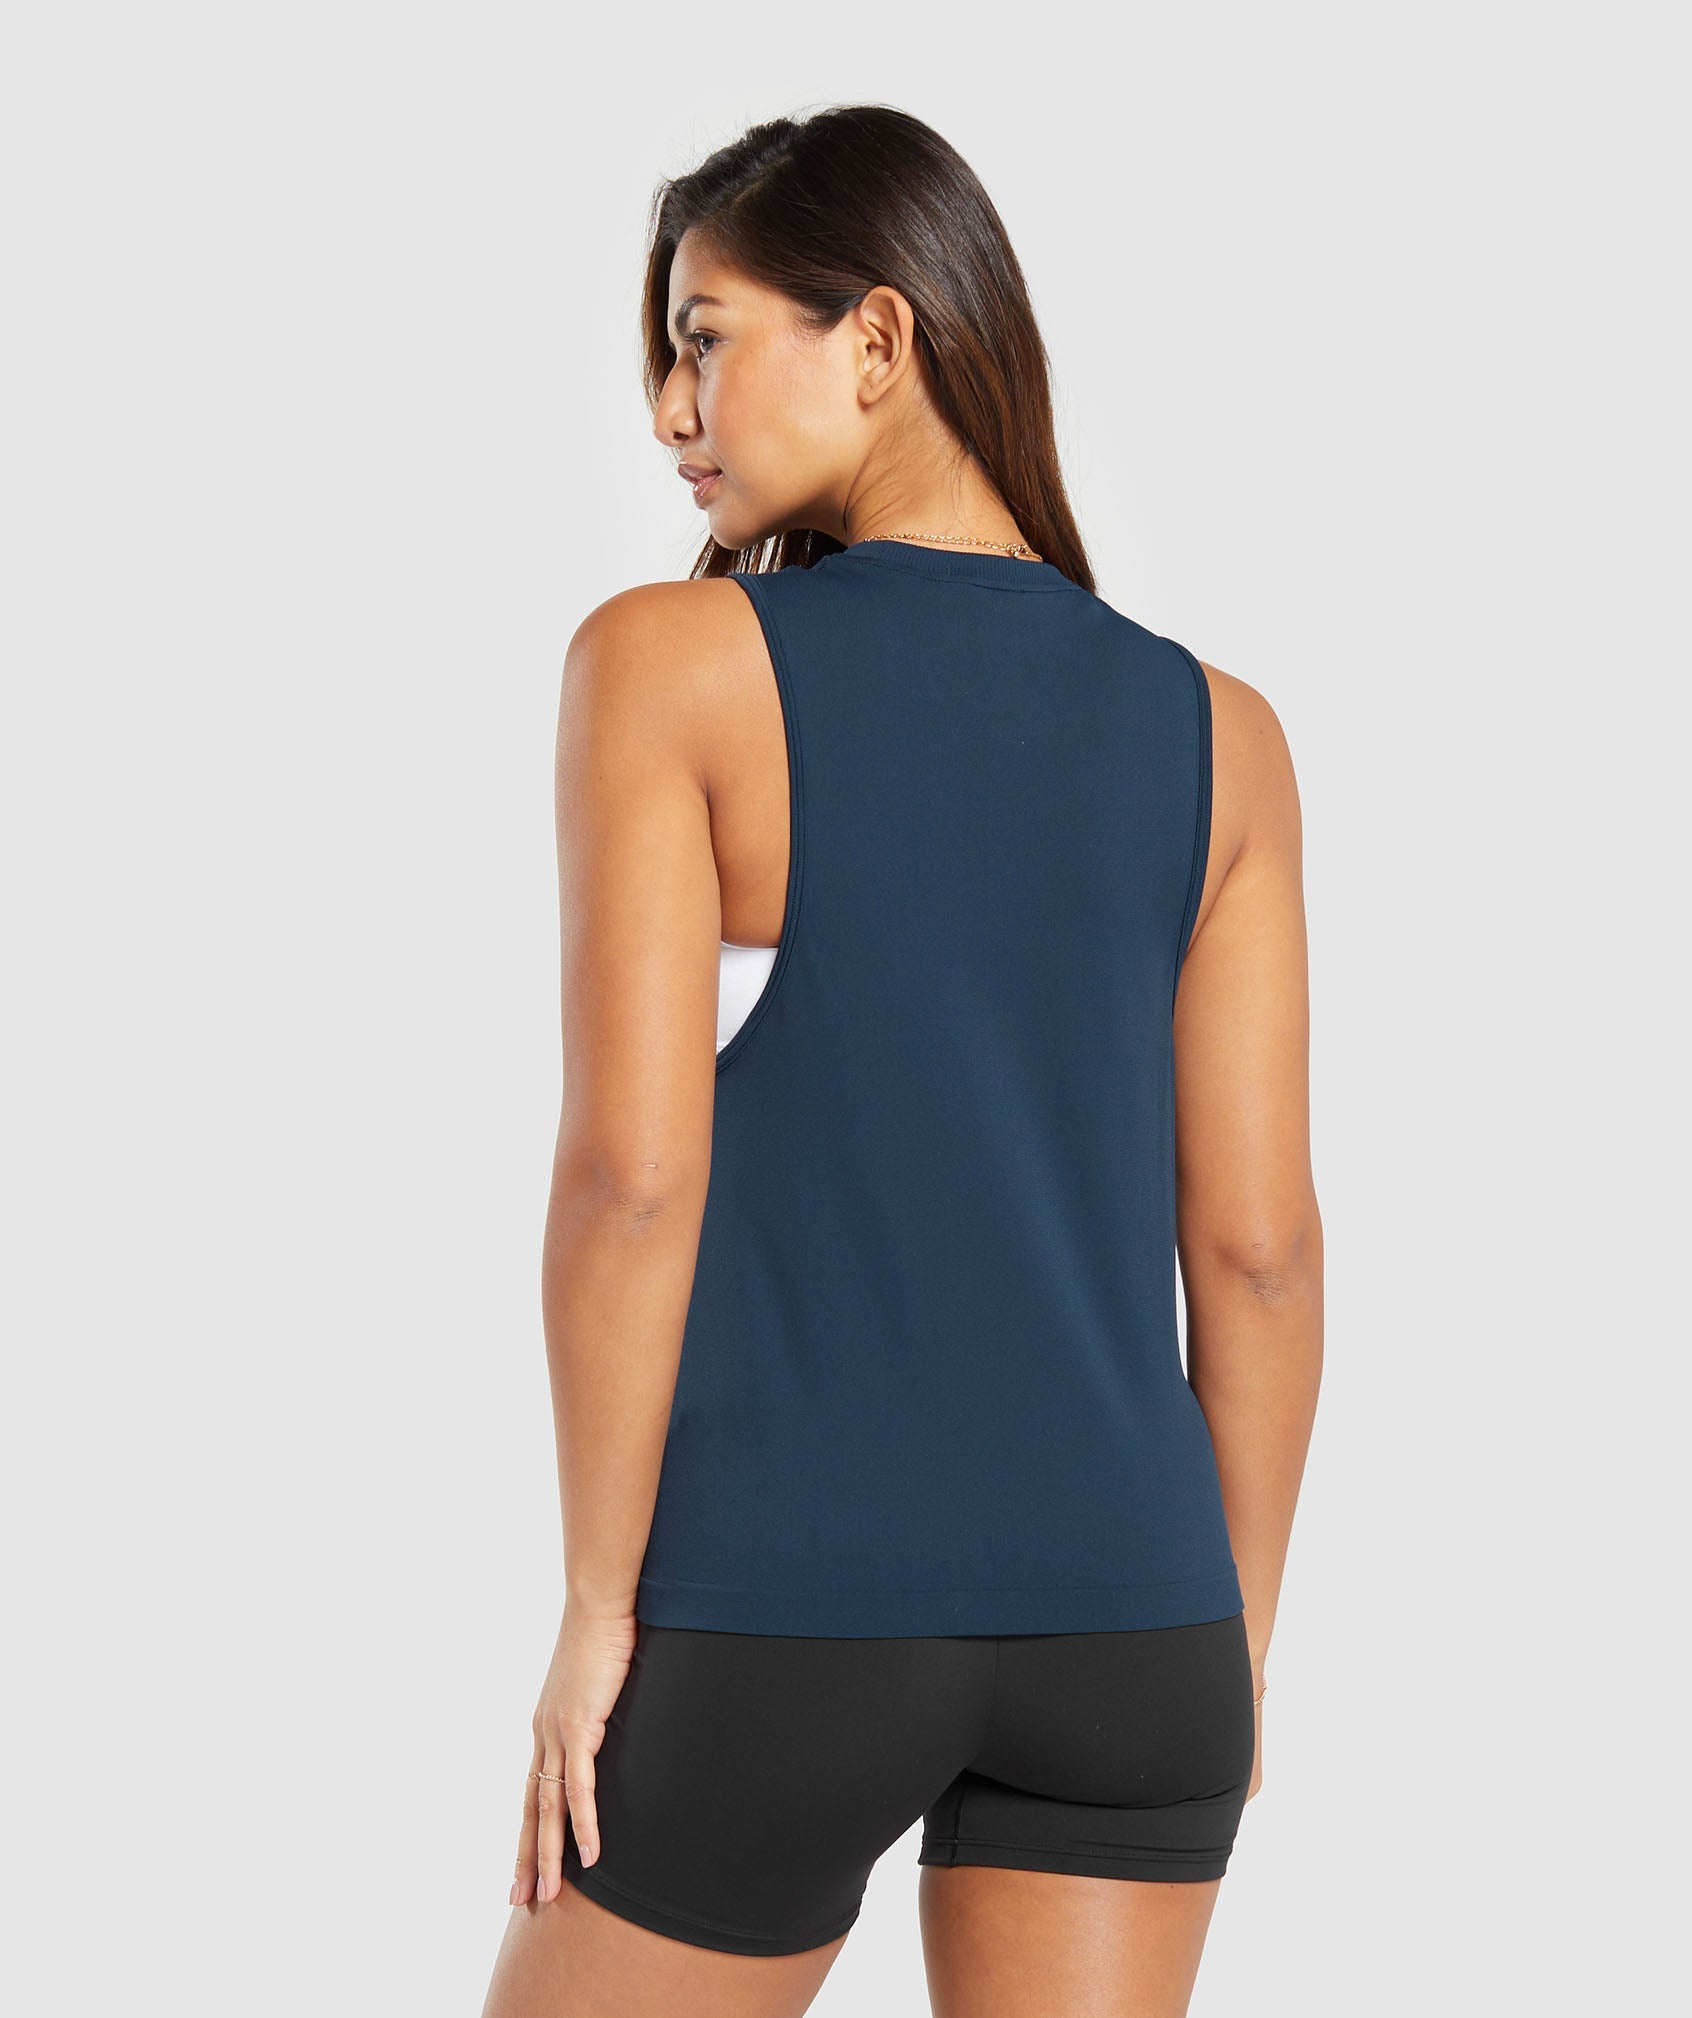 Everyday Seamless Tank in Navy - view 2